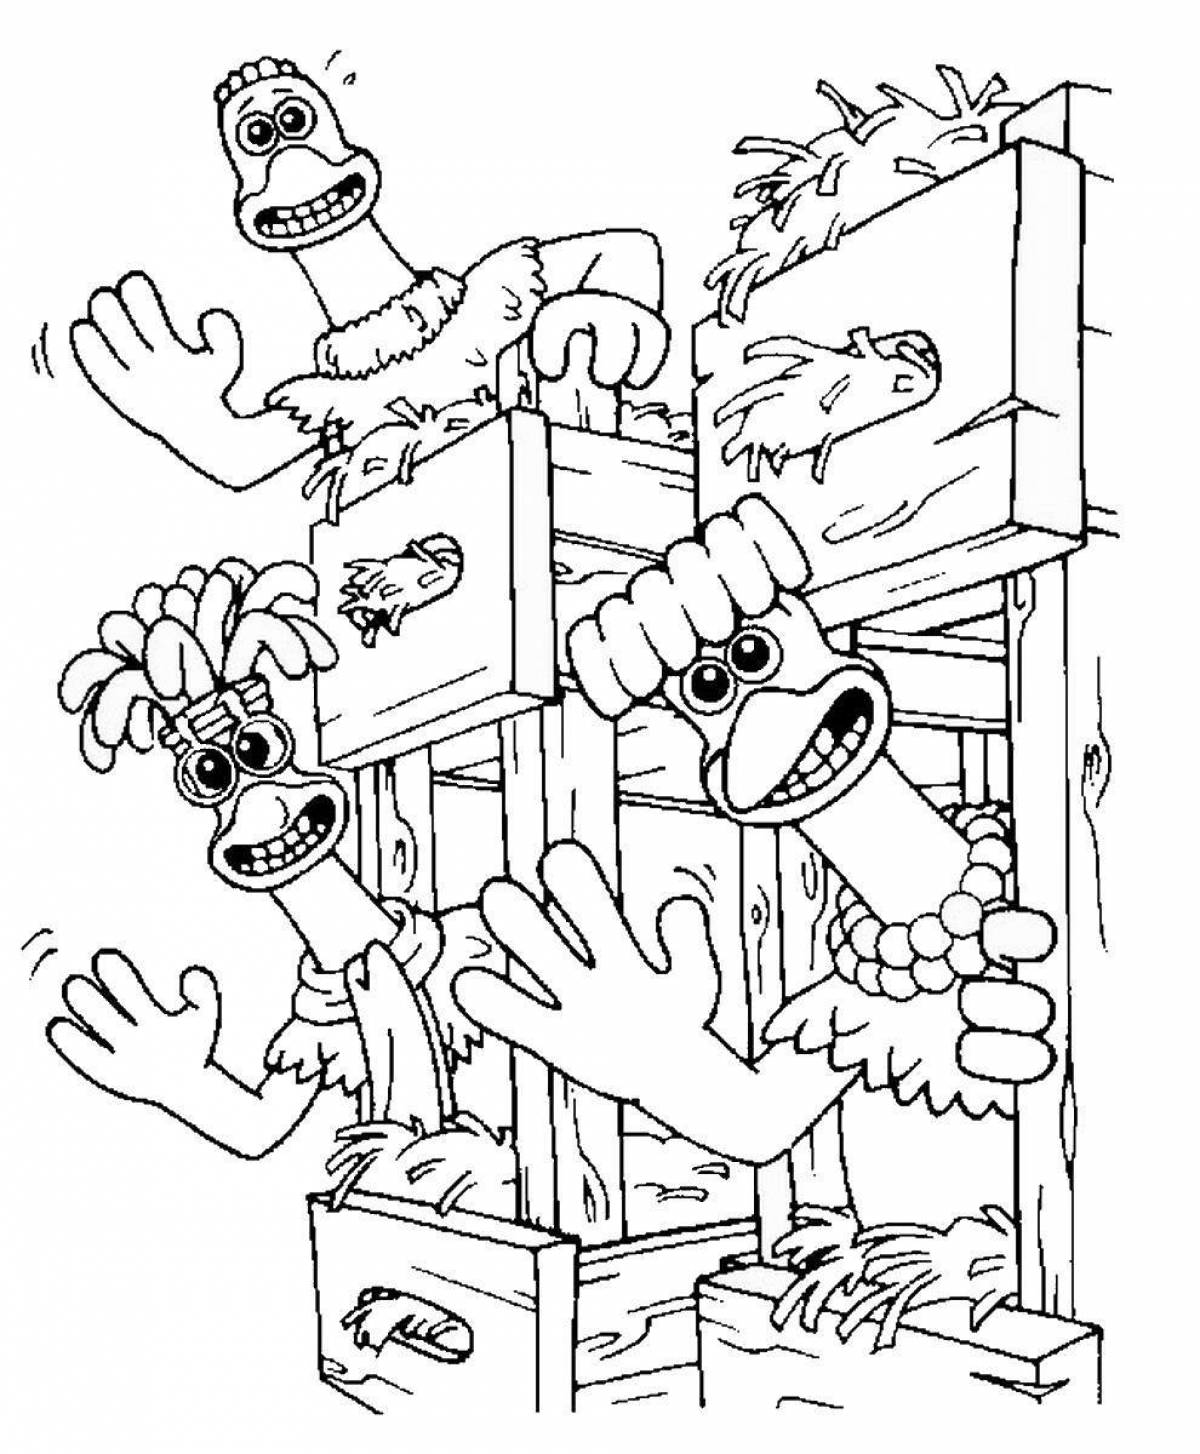 Wonderful chicken coop coloring book for babies